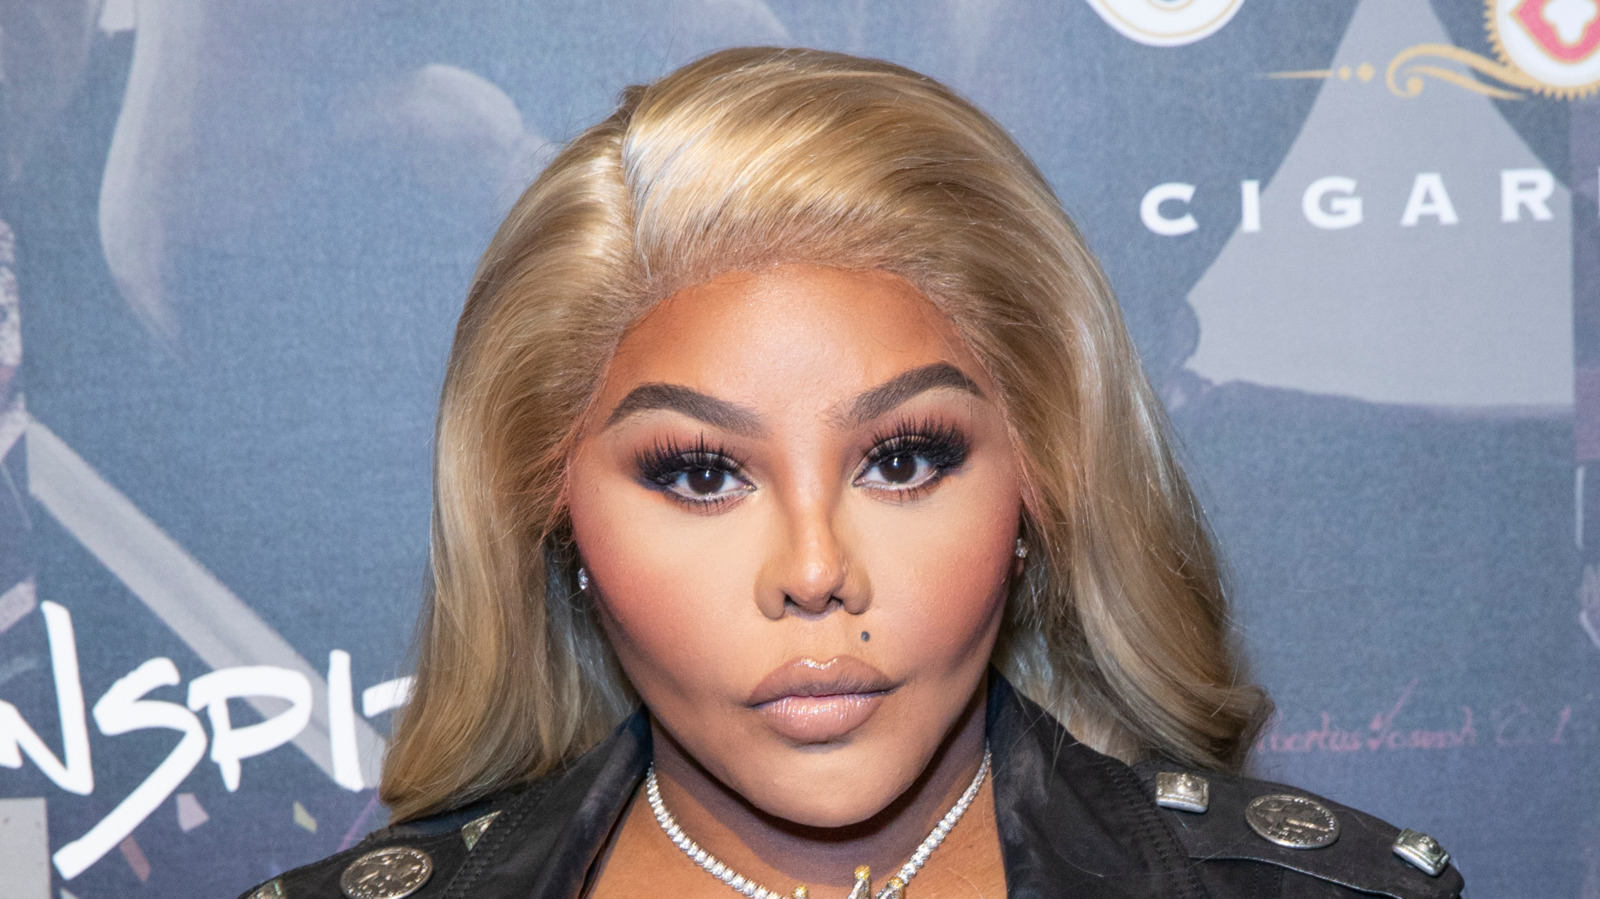 What We Know About Lil' Kim's Memoir